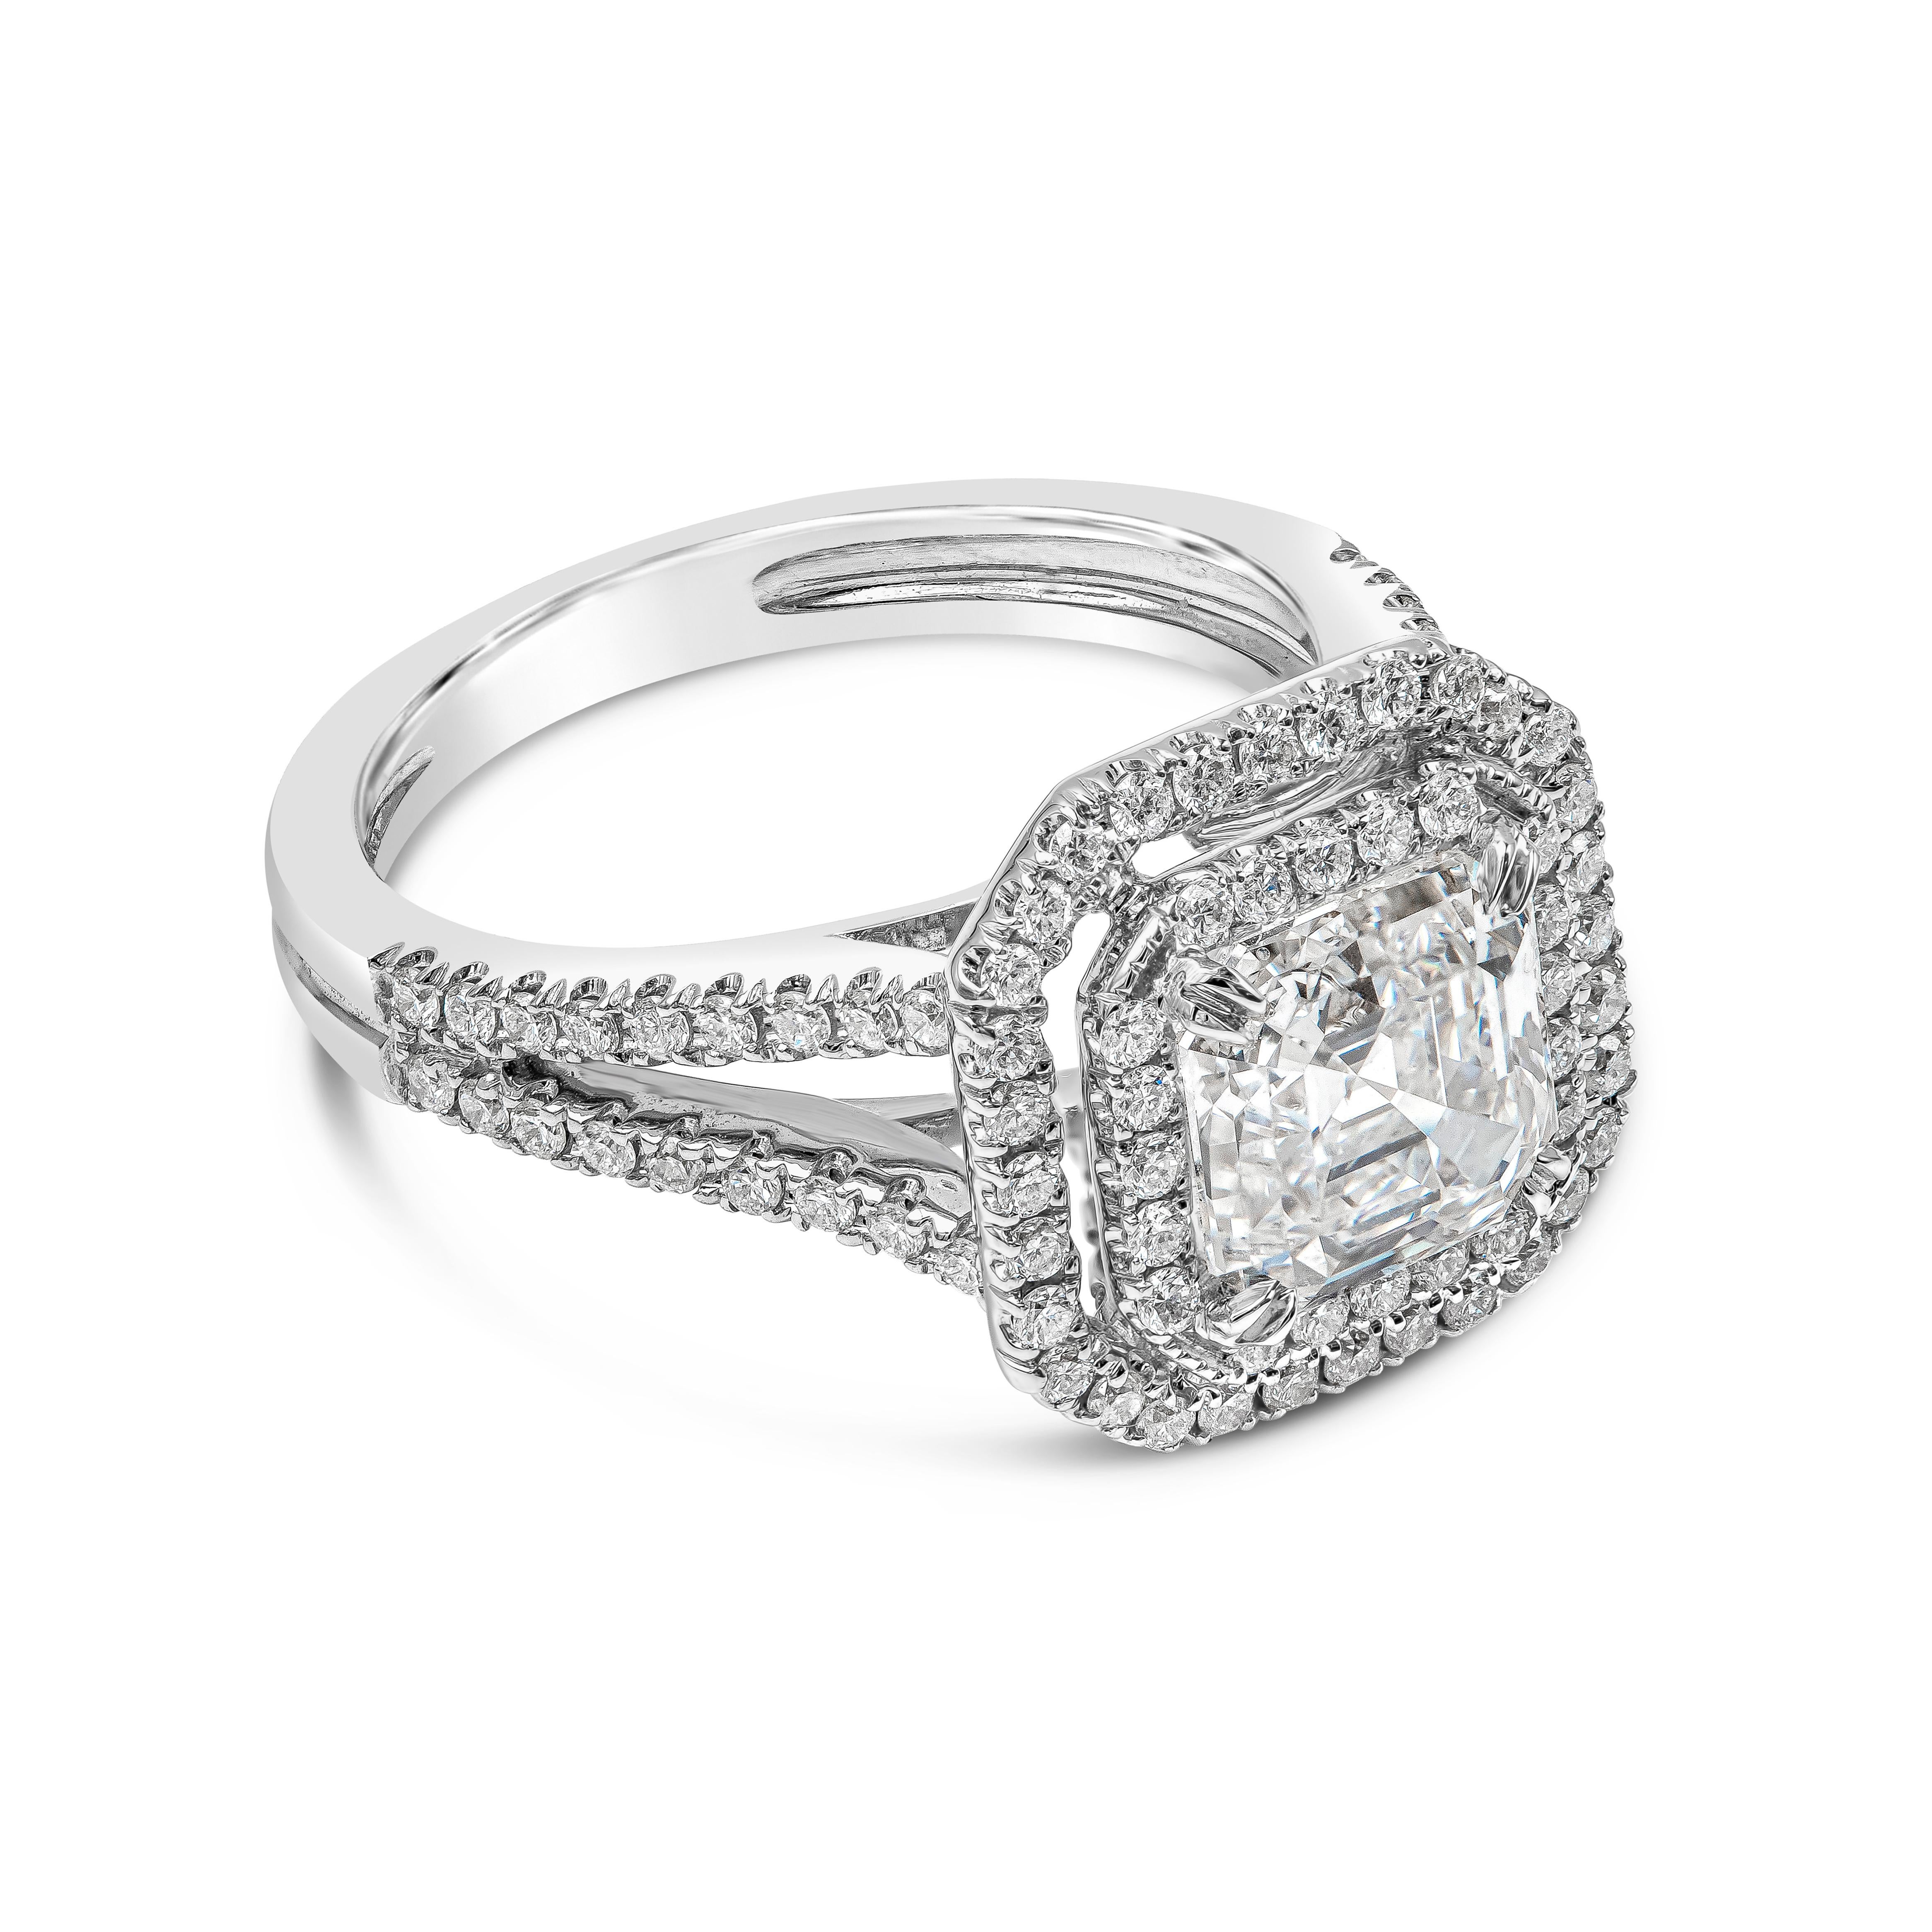 Features a well-crafted 2.18 carats asscher cut diamond center stone that GIA certified as F color, IF (internally Flawless) in clarity. Embellished with two rows of brilliant round cut diamonds as well as diamonds on the split-shank mounting